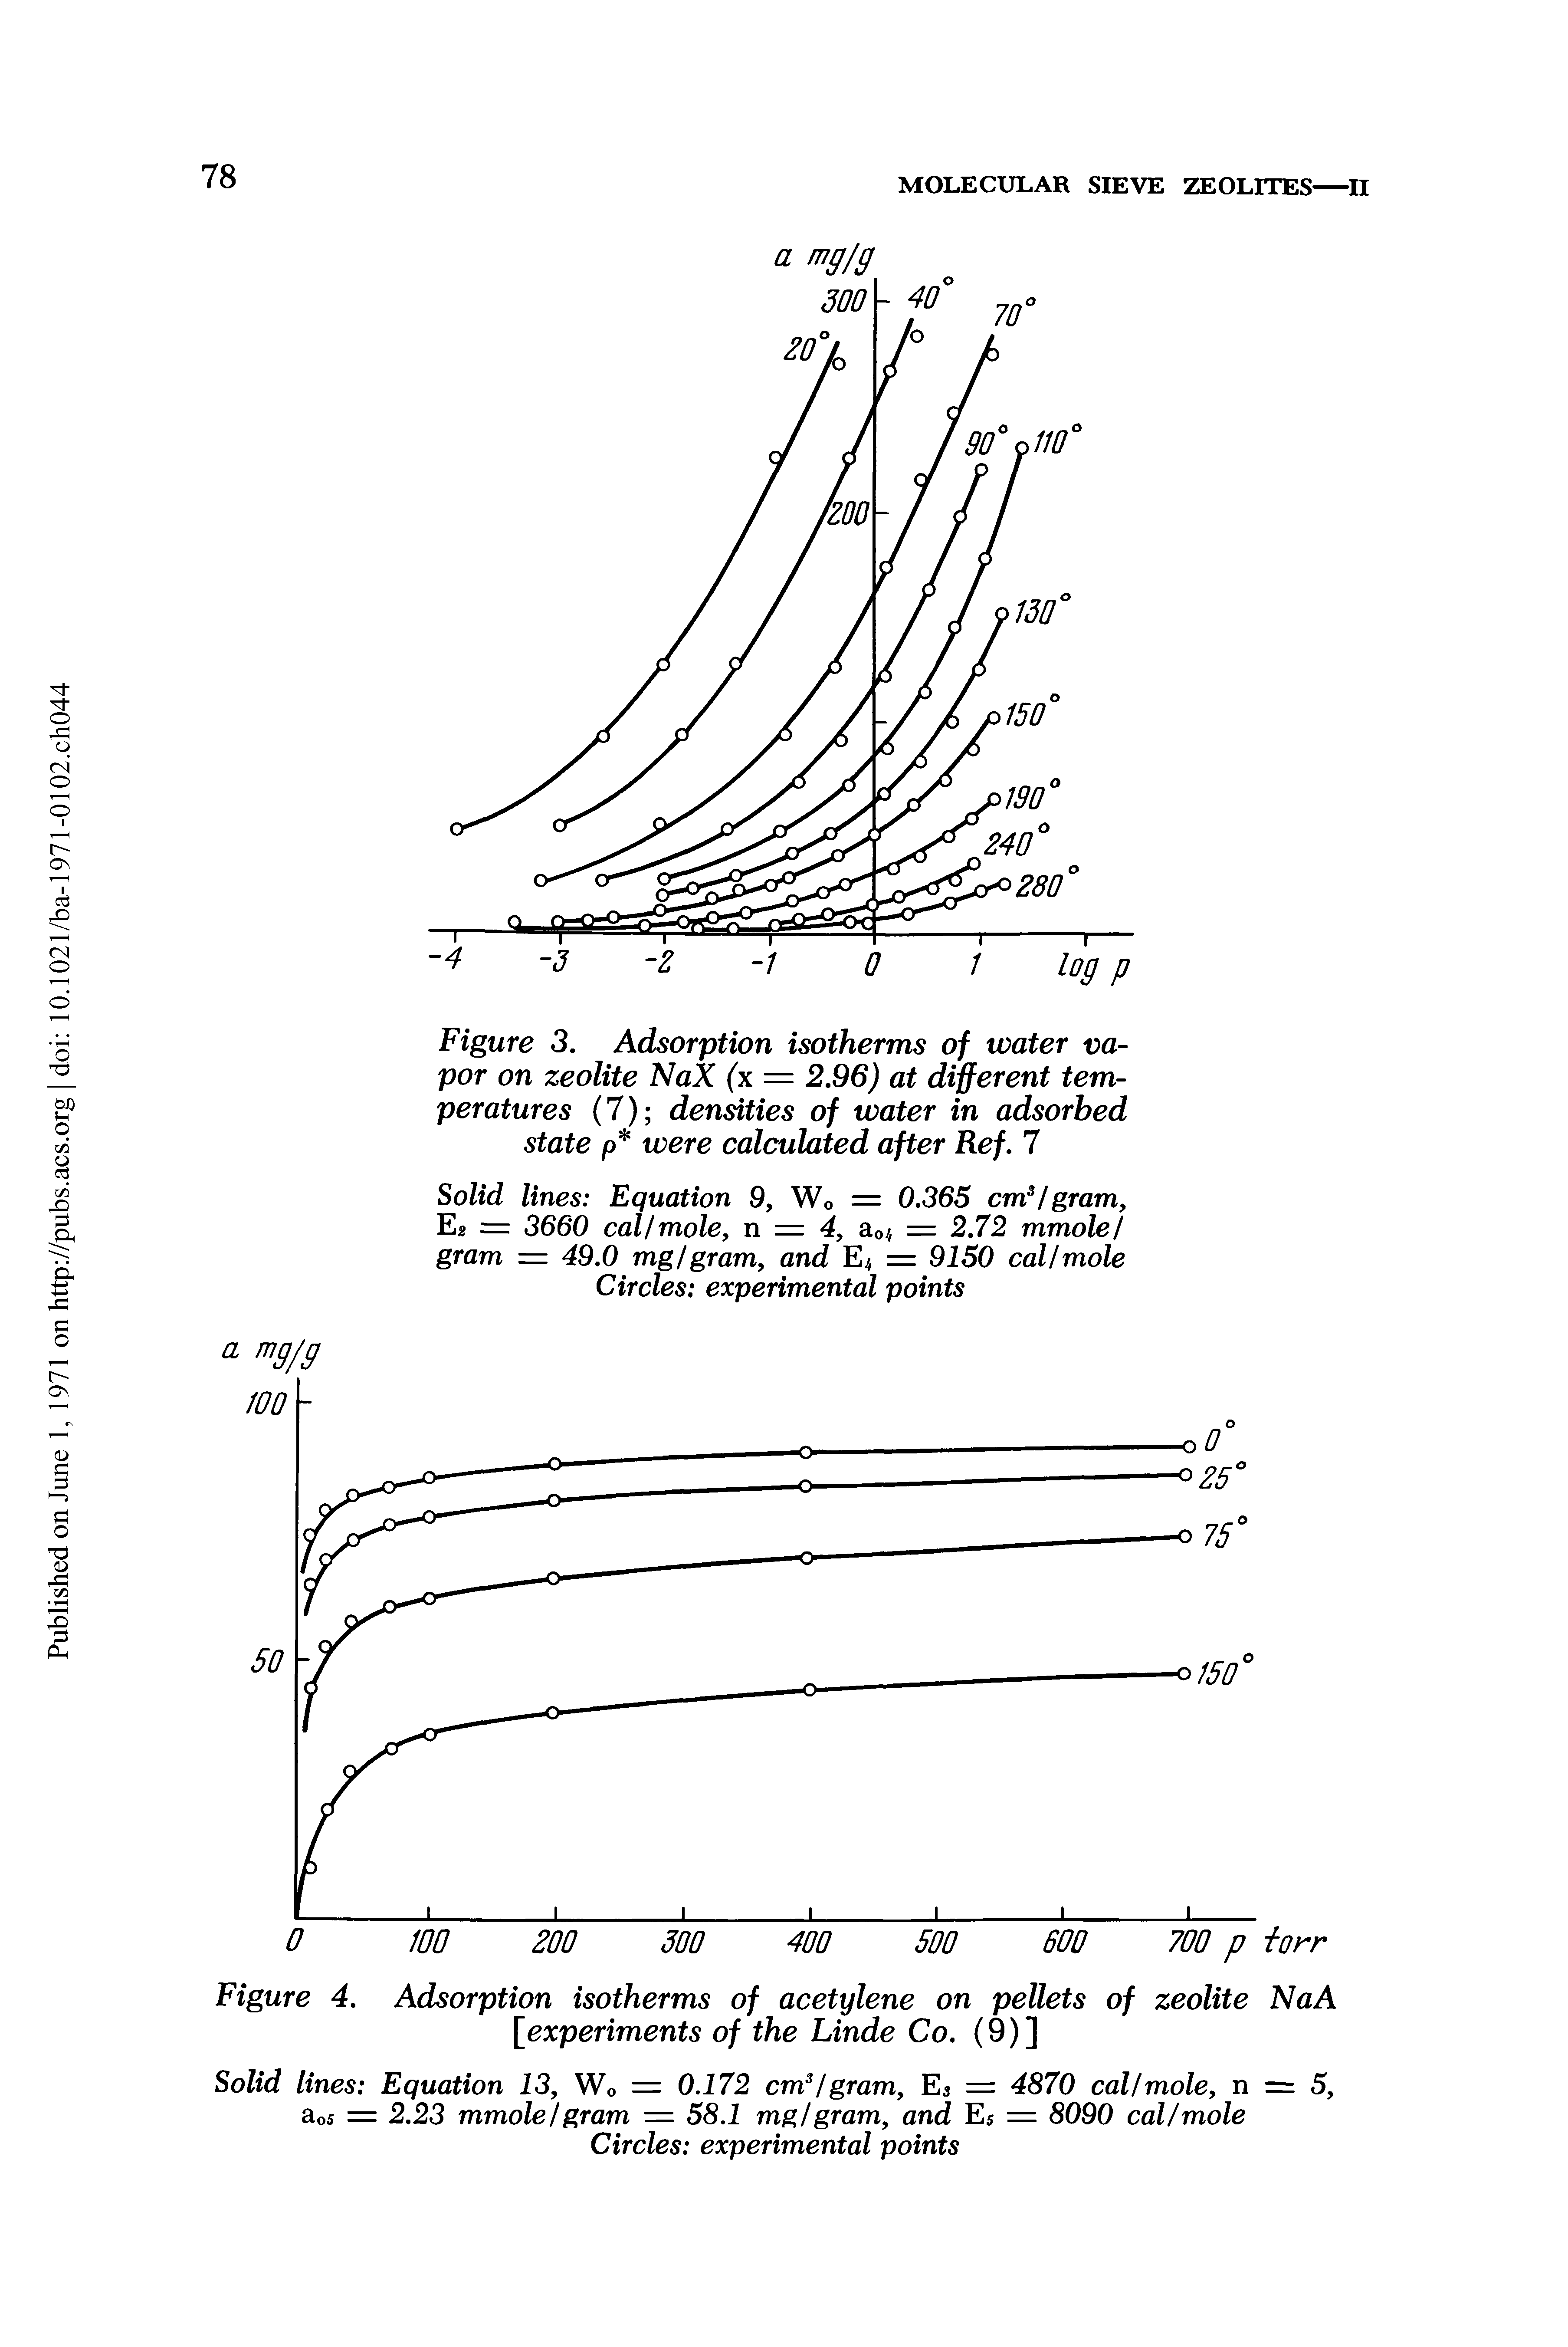 Figure 3. Adsorption isotherms of water vapor on zeolite NaX (x = 2.96) at different temperatures (7) densities of water in adsorbed state p were calculated after Ref. 7...